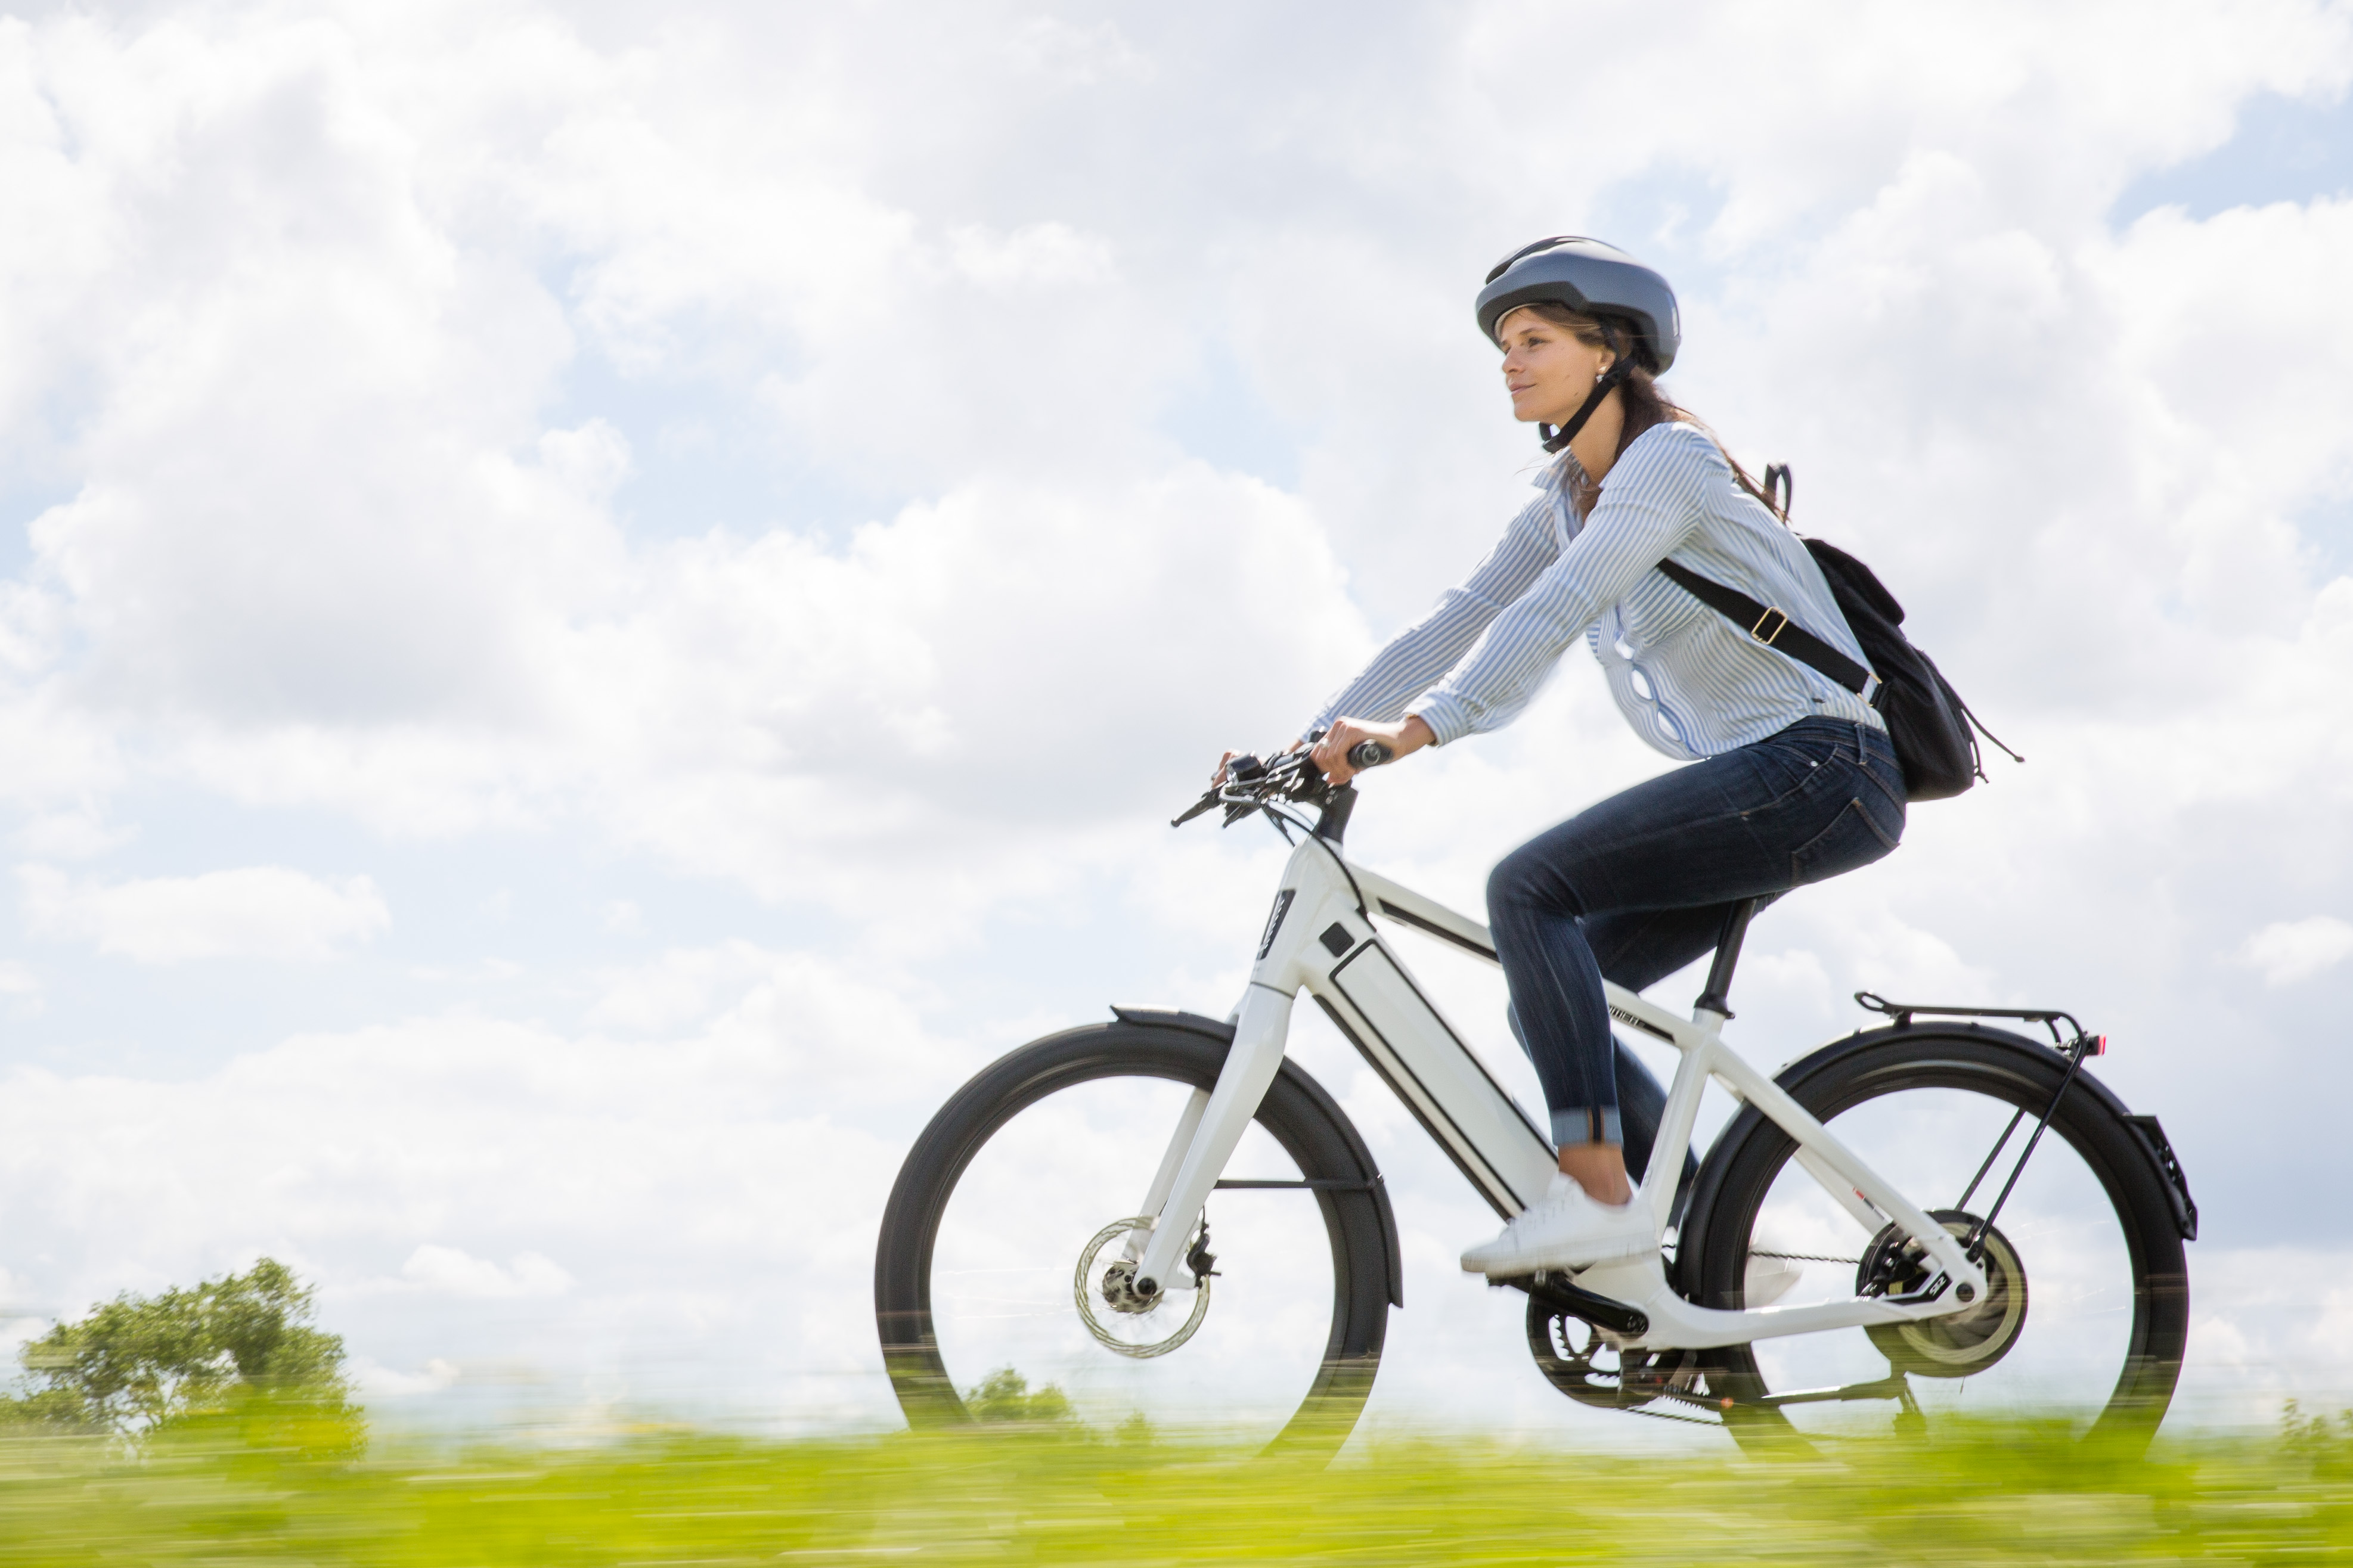 Typisch browser meer E-bike Experience | ANWB